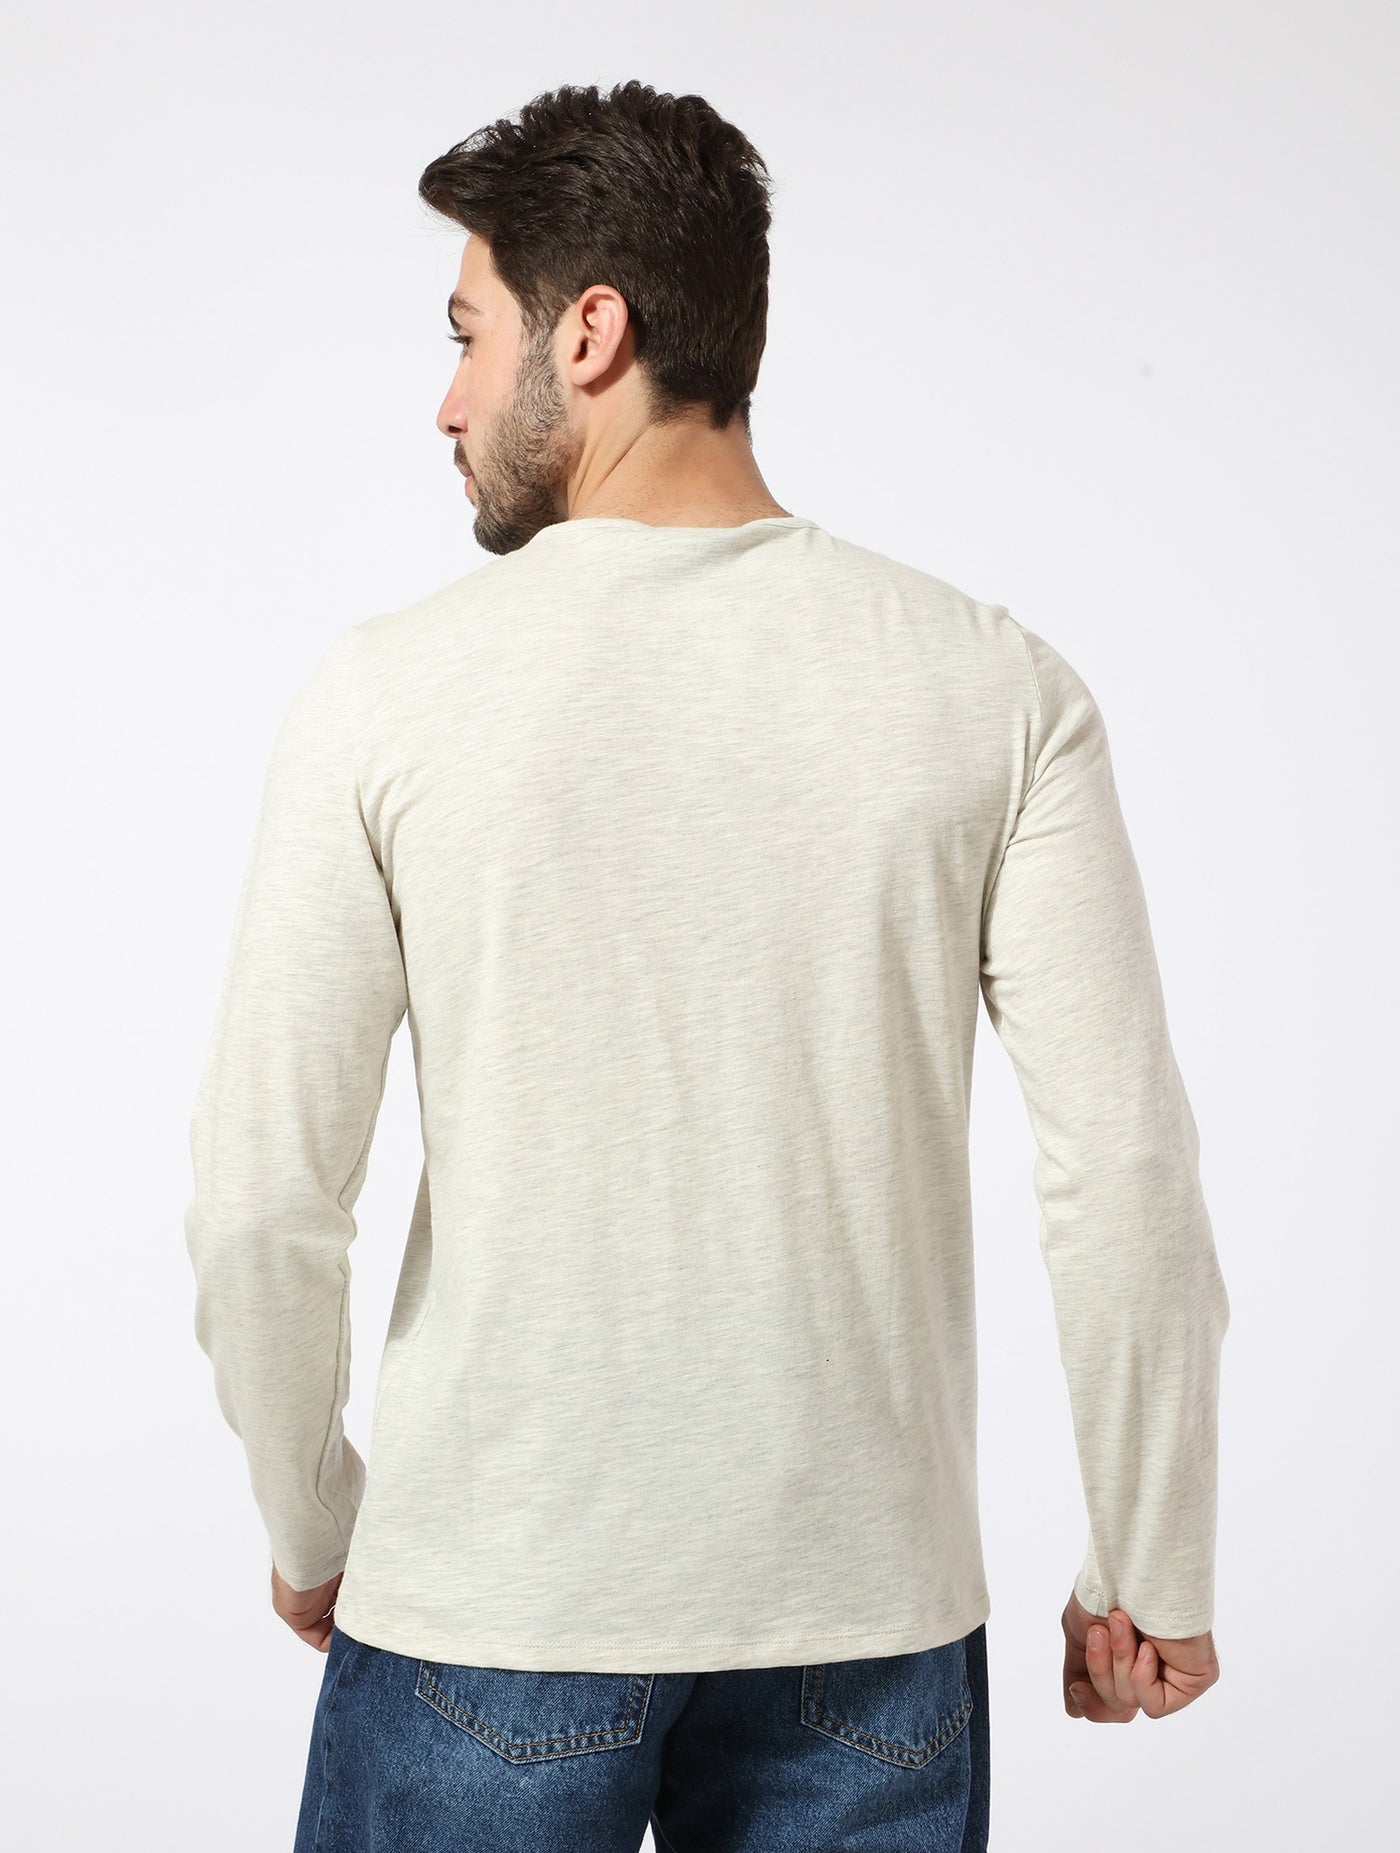 T-Shirt - Long Sleeve - Round Neck with Button Closure